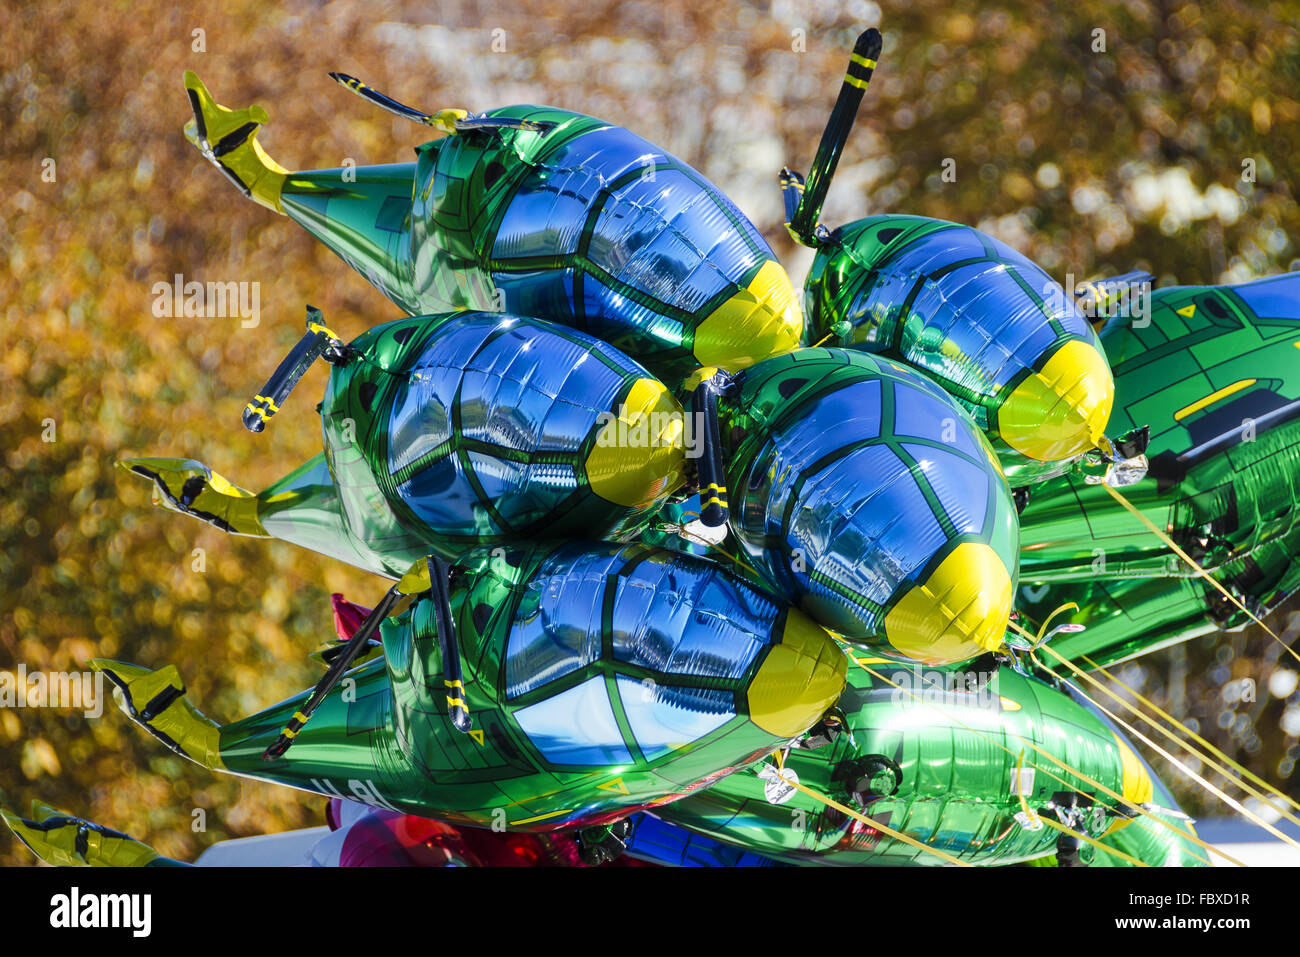 balloons shaped like helicopters Stock Photo